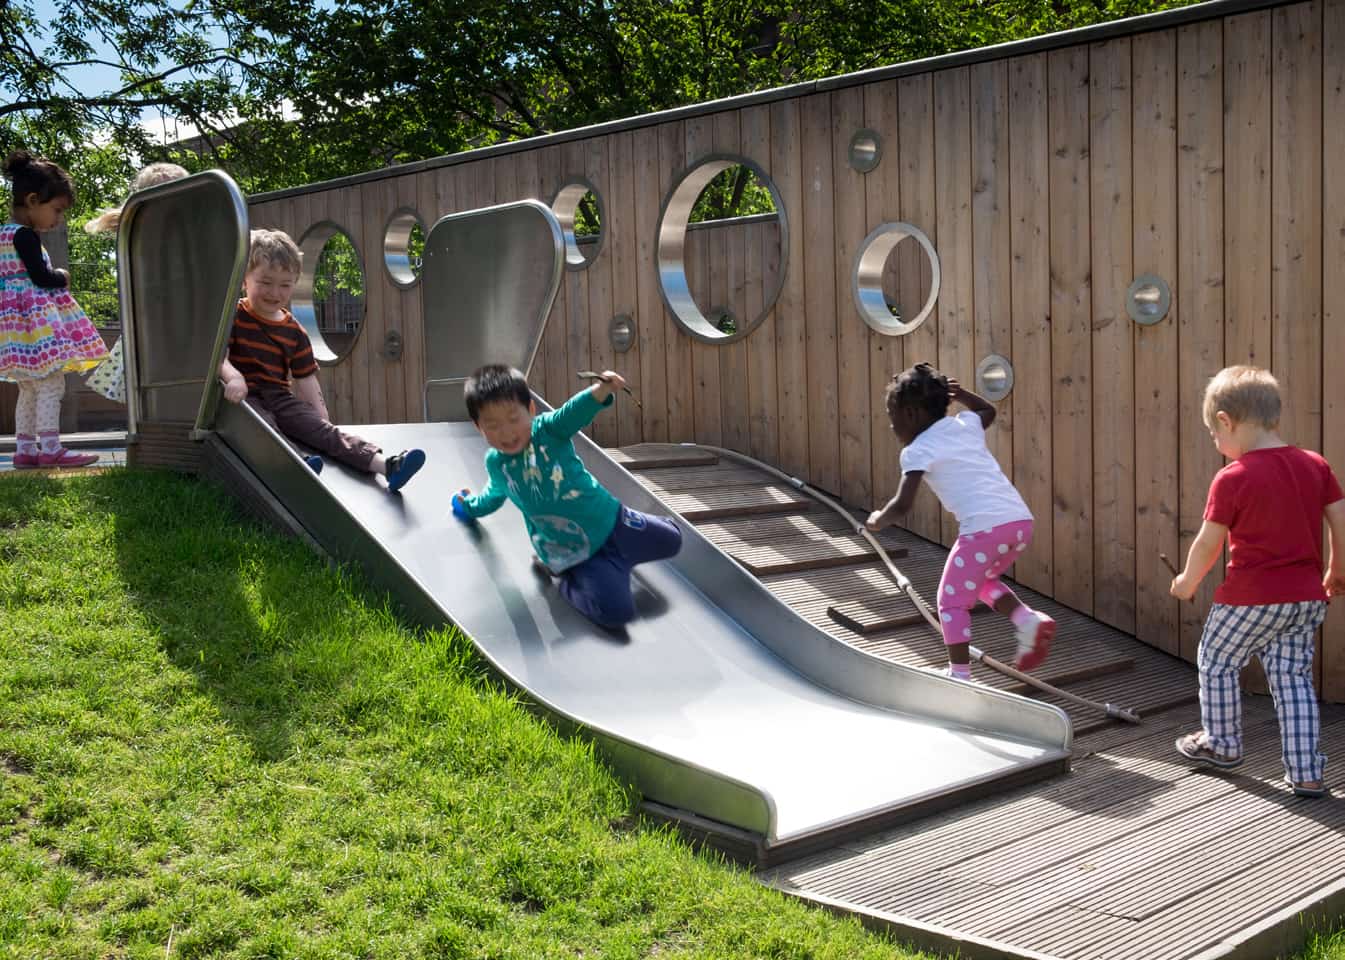 Kids from Arcadia Nursery playing on a slide with grass beside it in the garden.